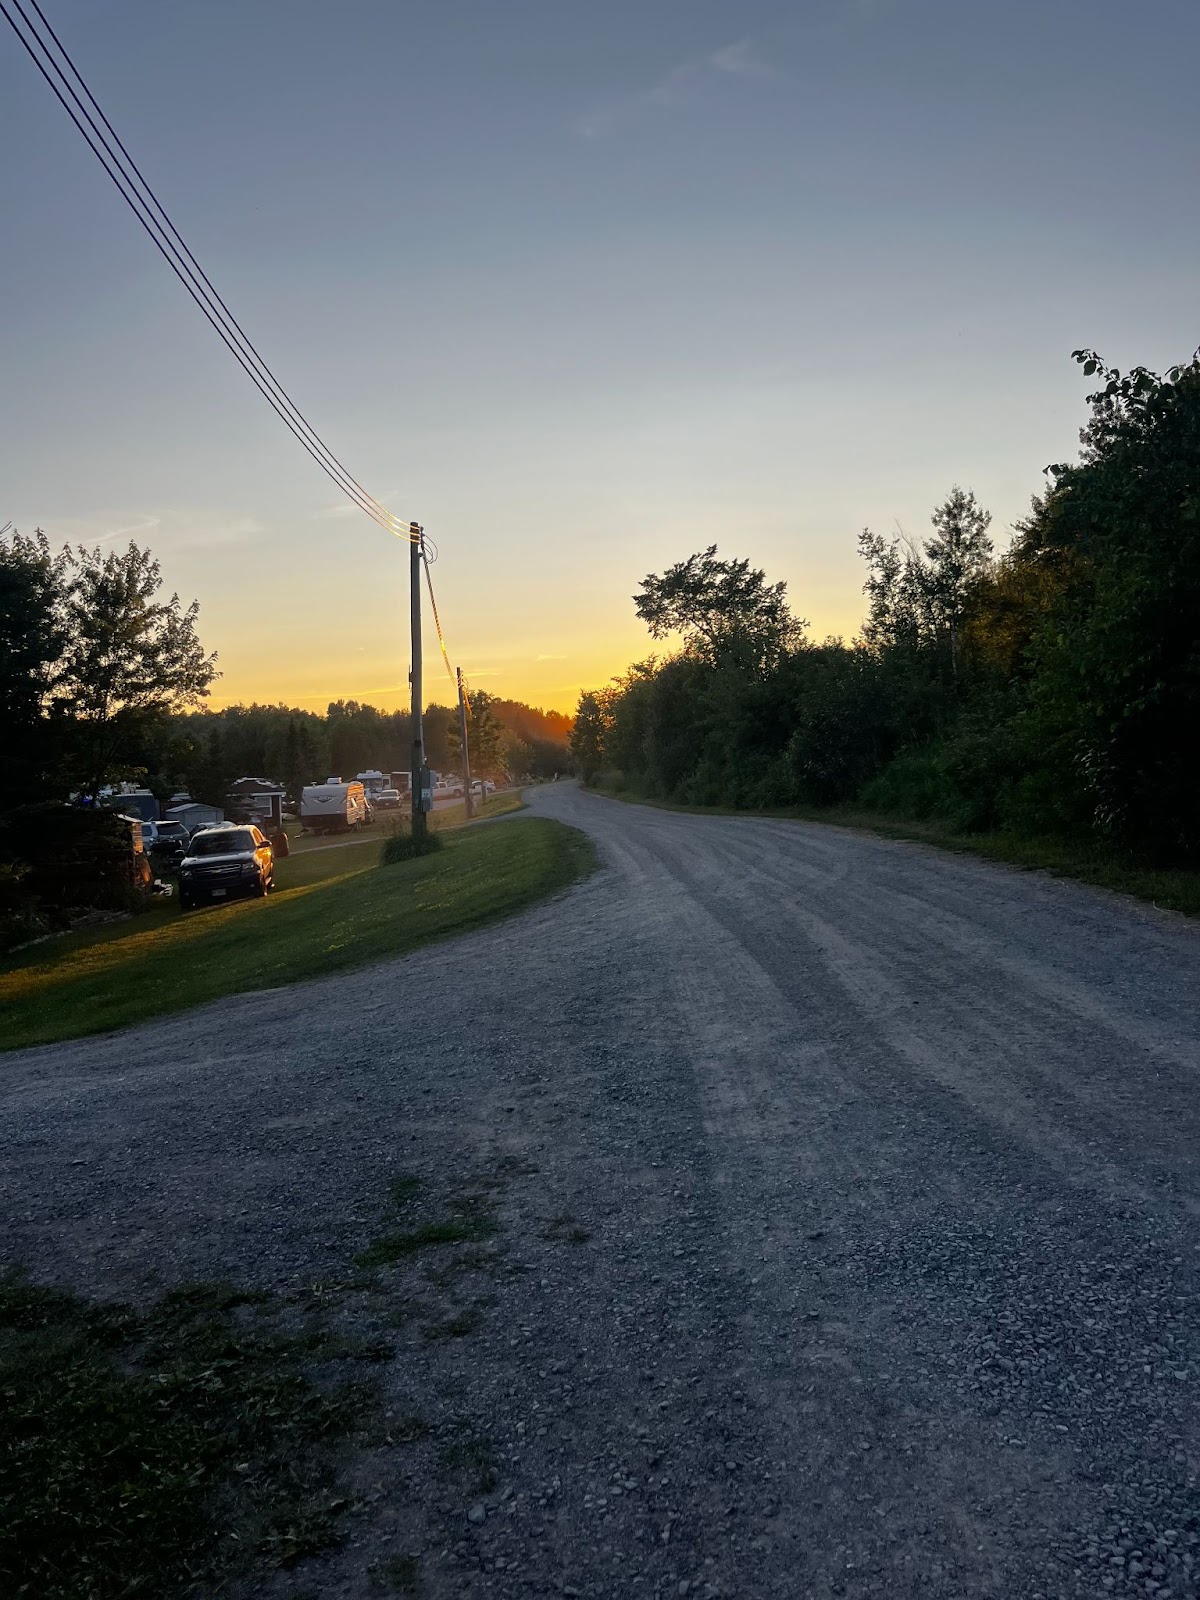 a gravel campground road at dusk, with dark, thick forest on the right and rows of cars and RVs parked in a green field on the left , under a set of power lines. The sky is getting dark and there is the end of an orange sunset in the distance.